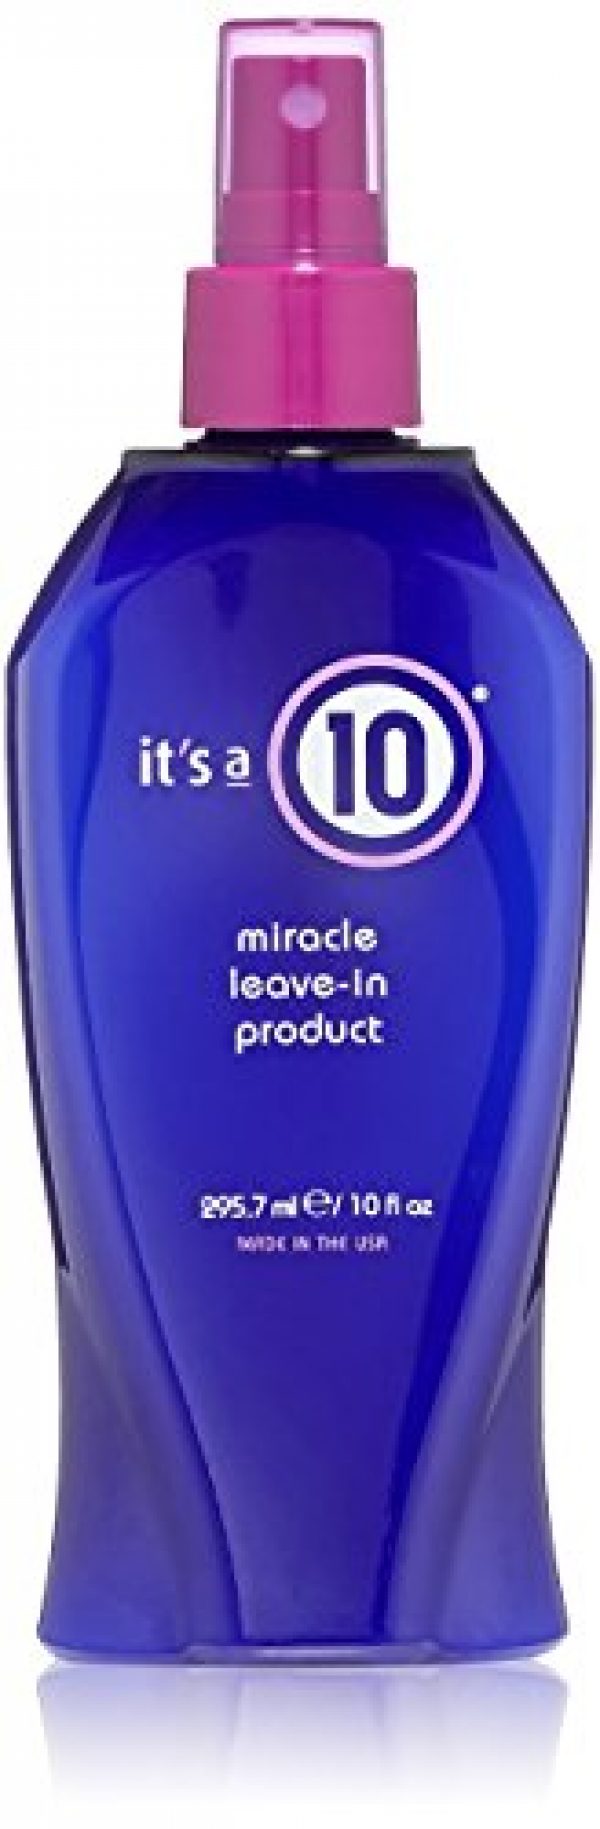 It's A 10 Haircare Miracle Leave-In Conditioner Spray - 10 oz. - 1ct 13